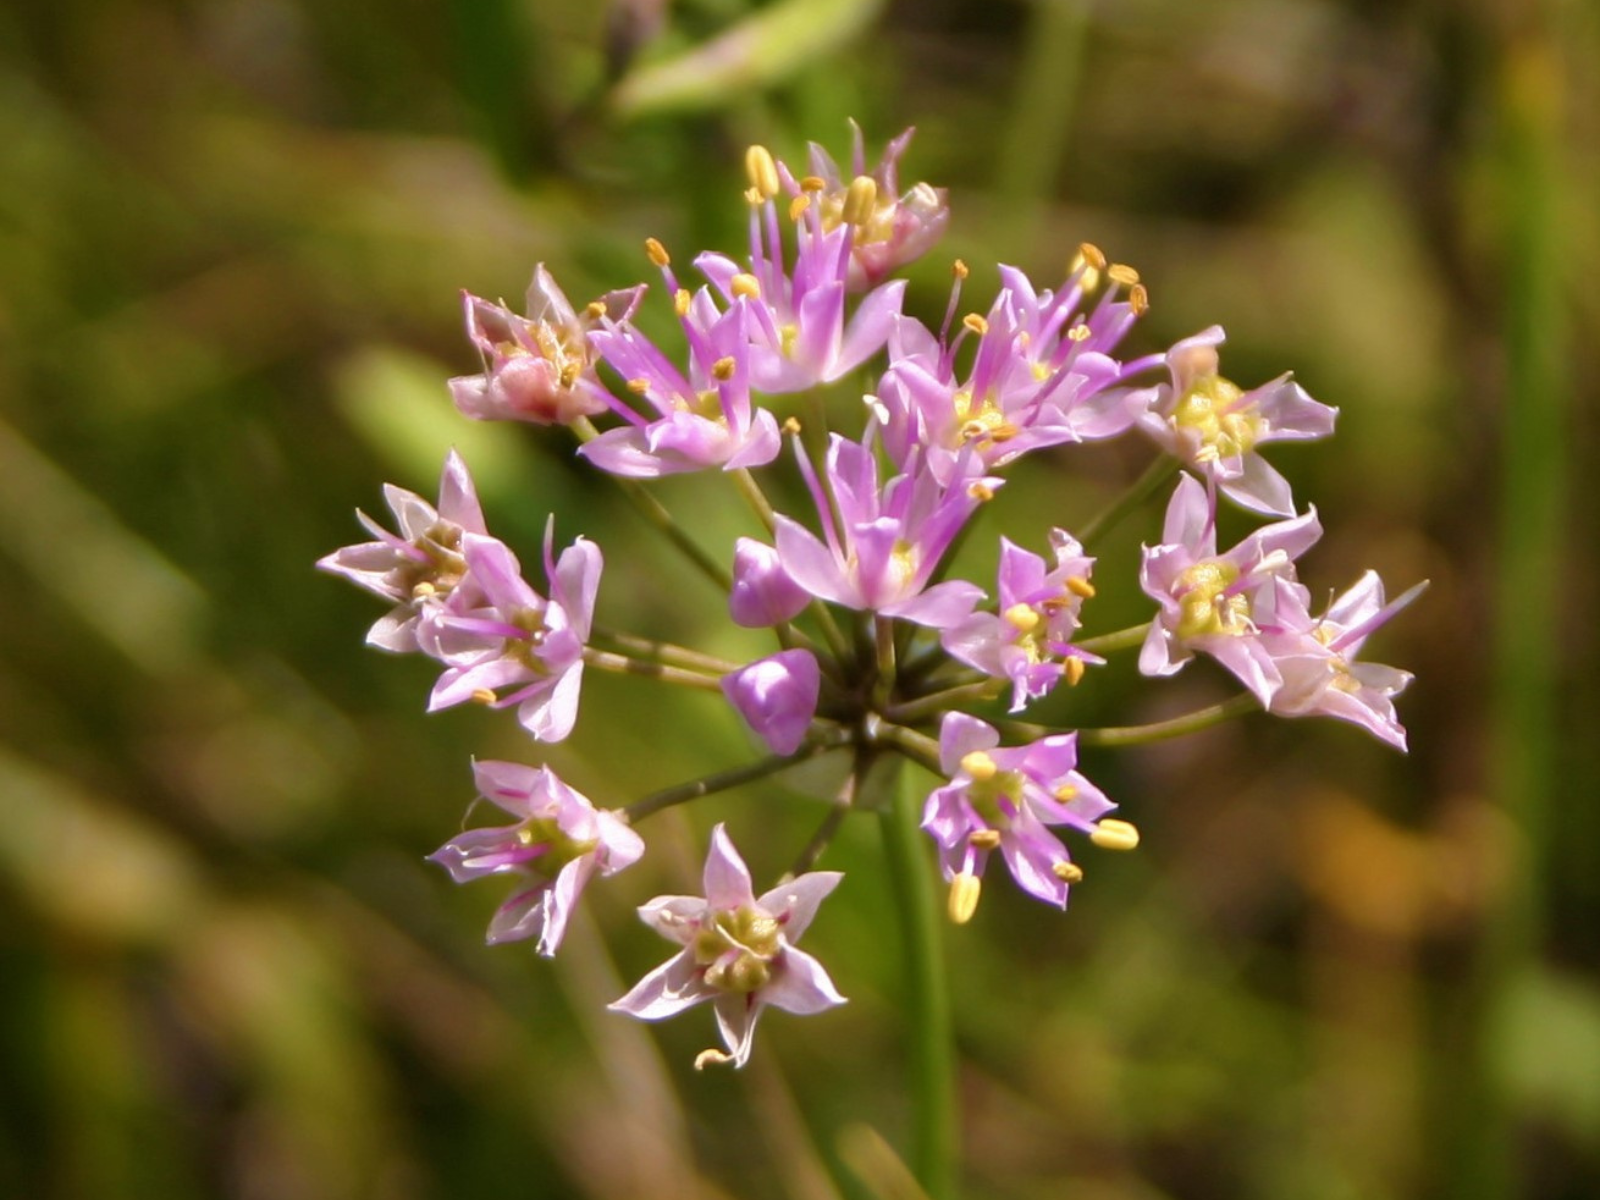 Close-up on the head of an Autumn onion plant. a cluster of small pink flowers.